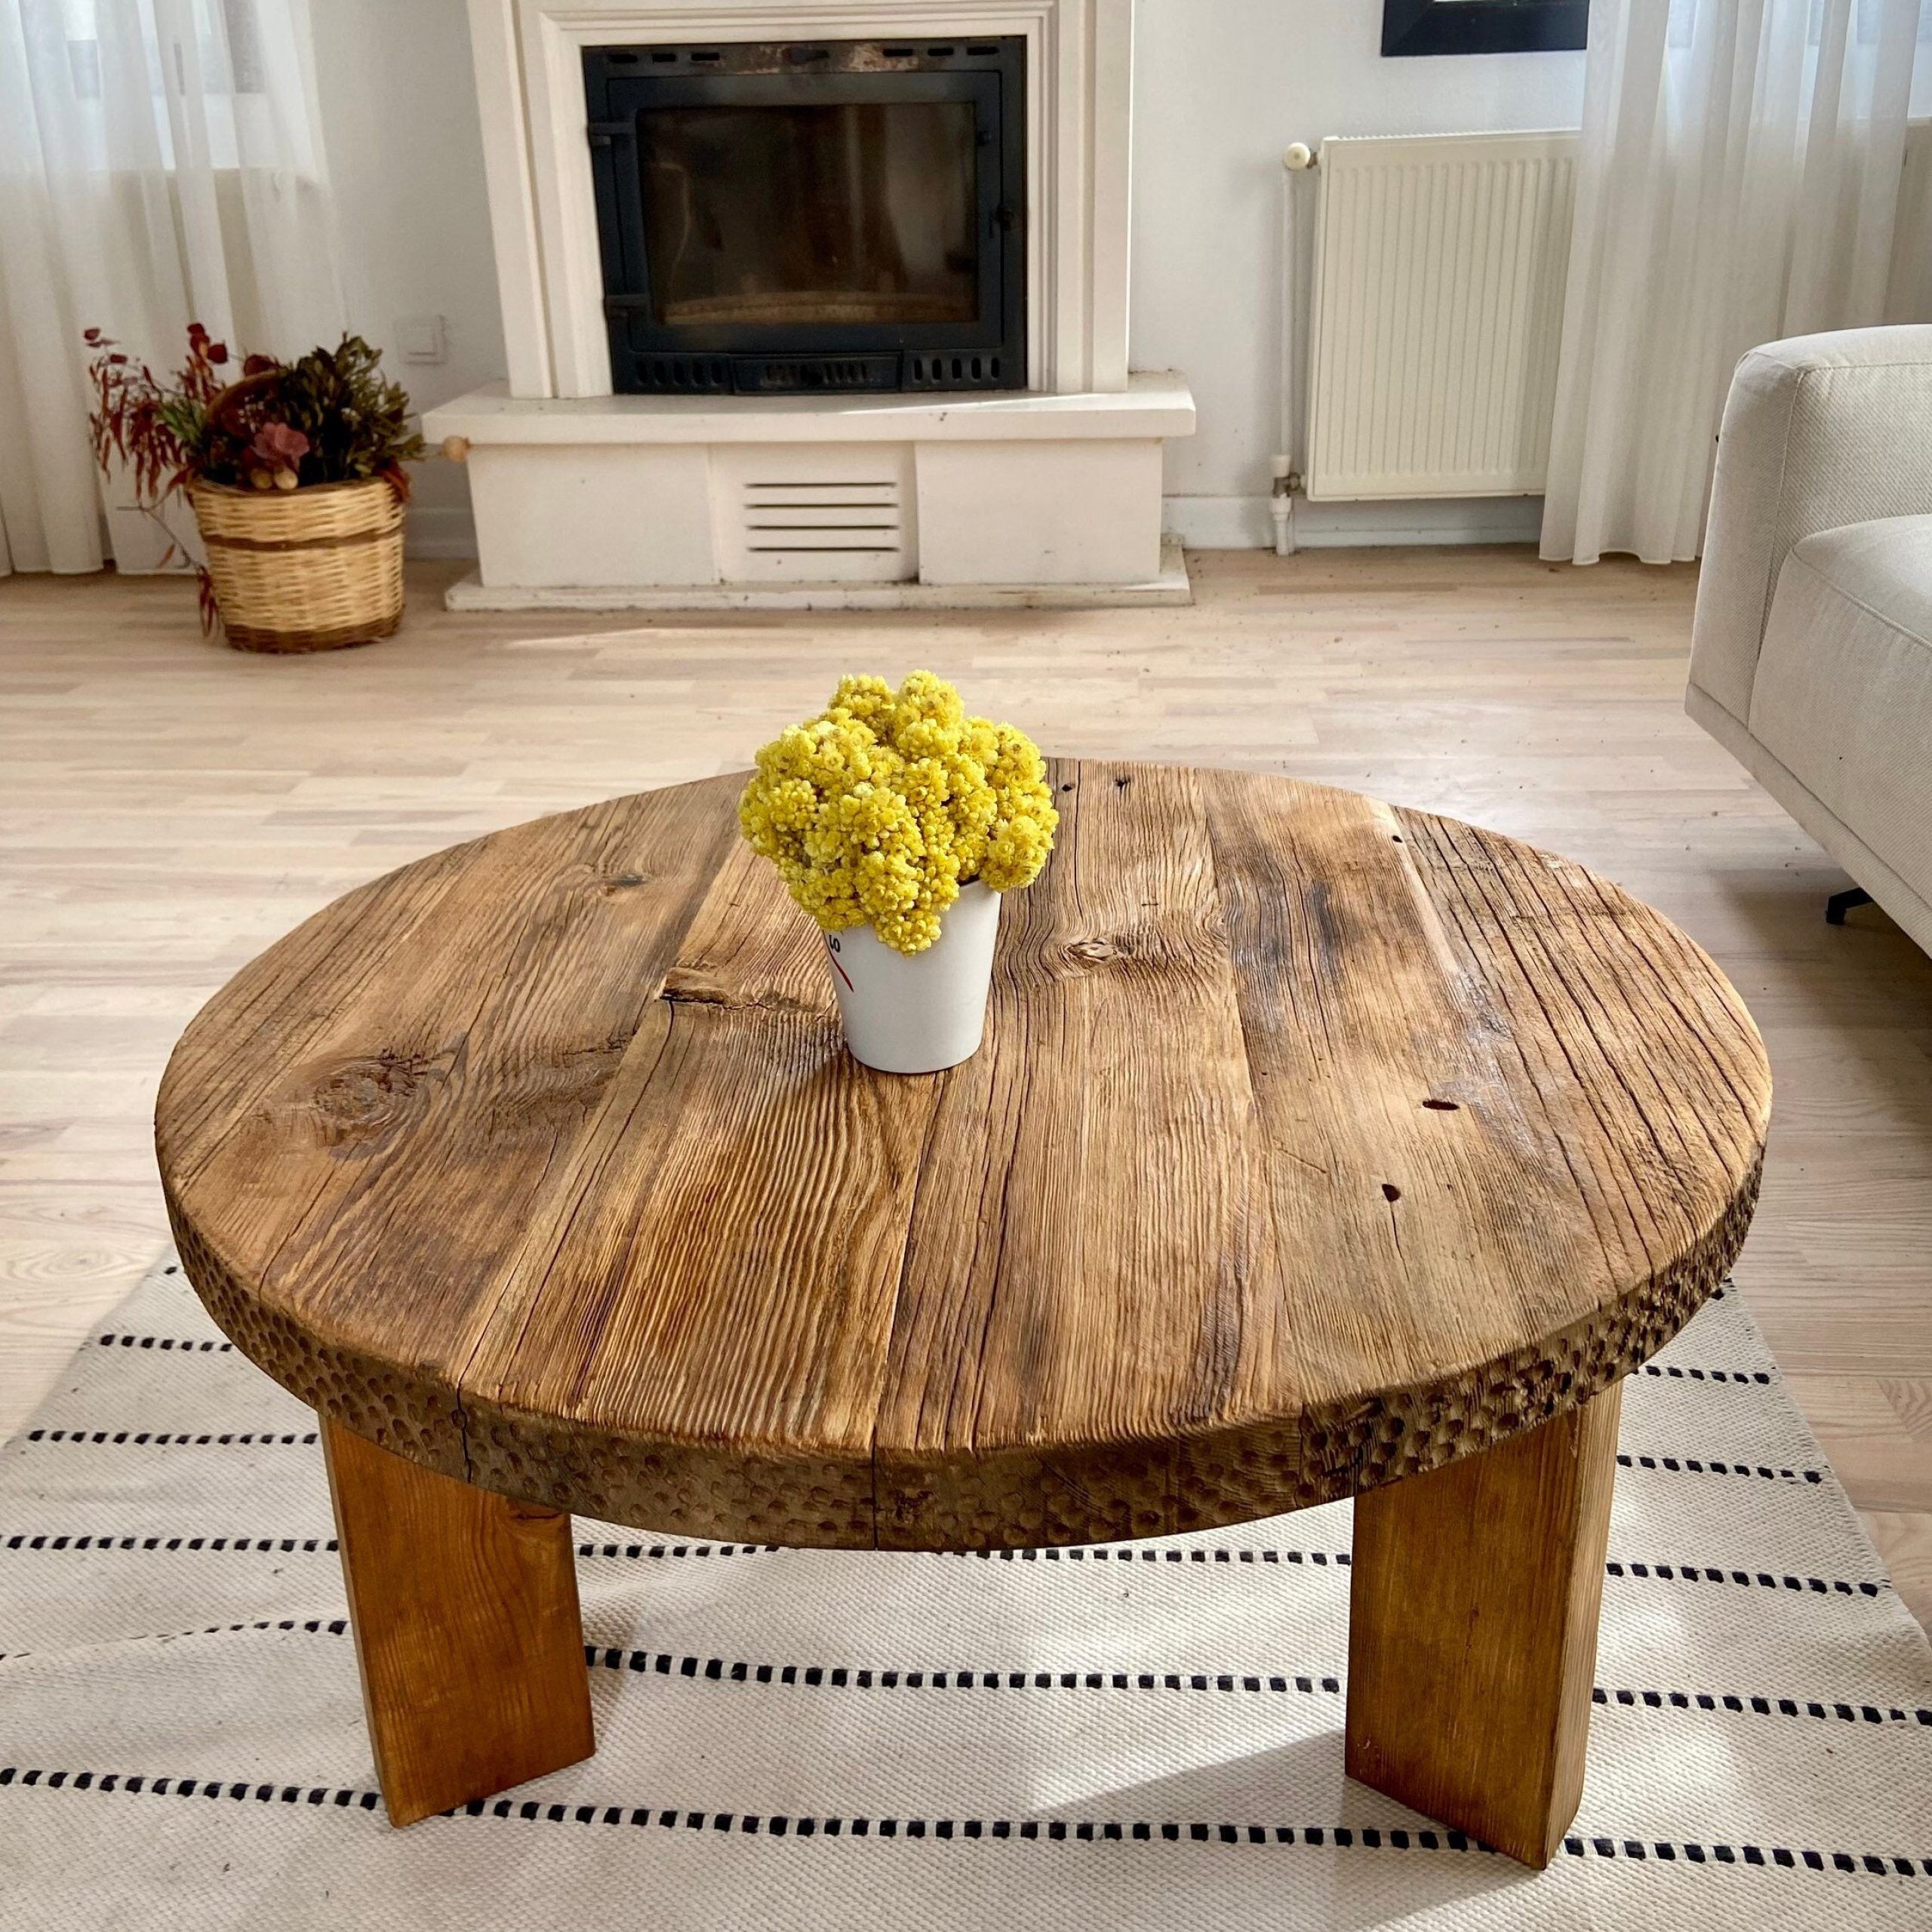 Natural Wood Coffee Table Reclaimed, Round Wooden Coffee Table Rustic Home  Decor, Rustic Round Coffee Table Furniture Handmade – Etsy Pertaining To Rustic Wood Coffee Tables (View 4 of 15)